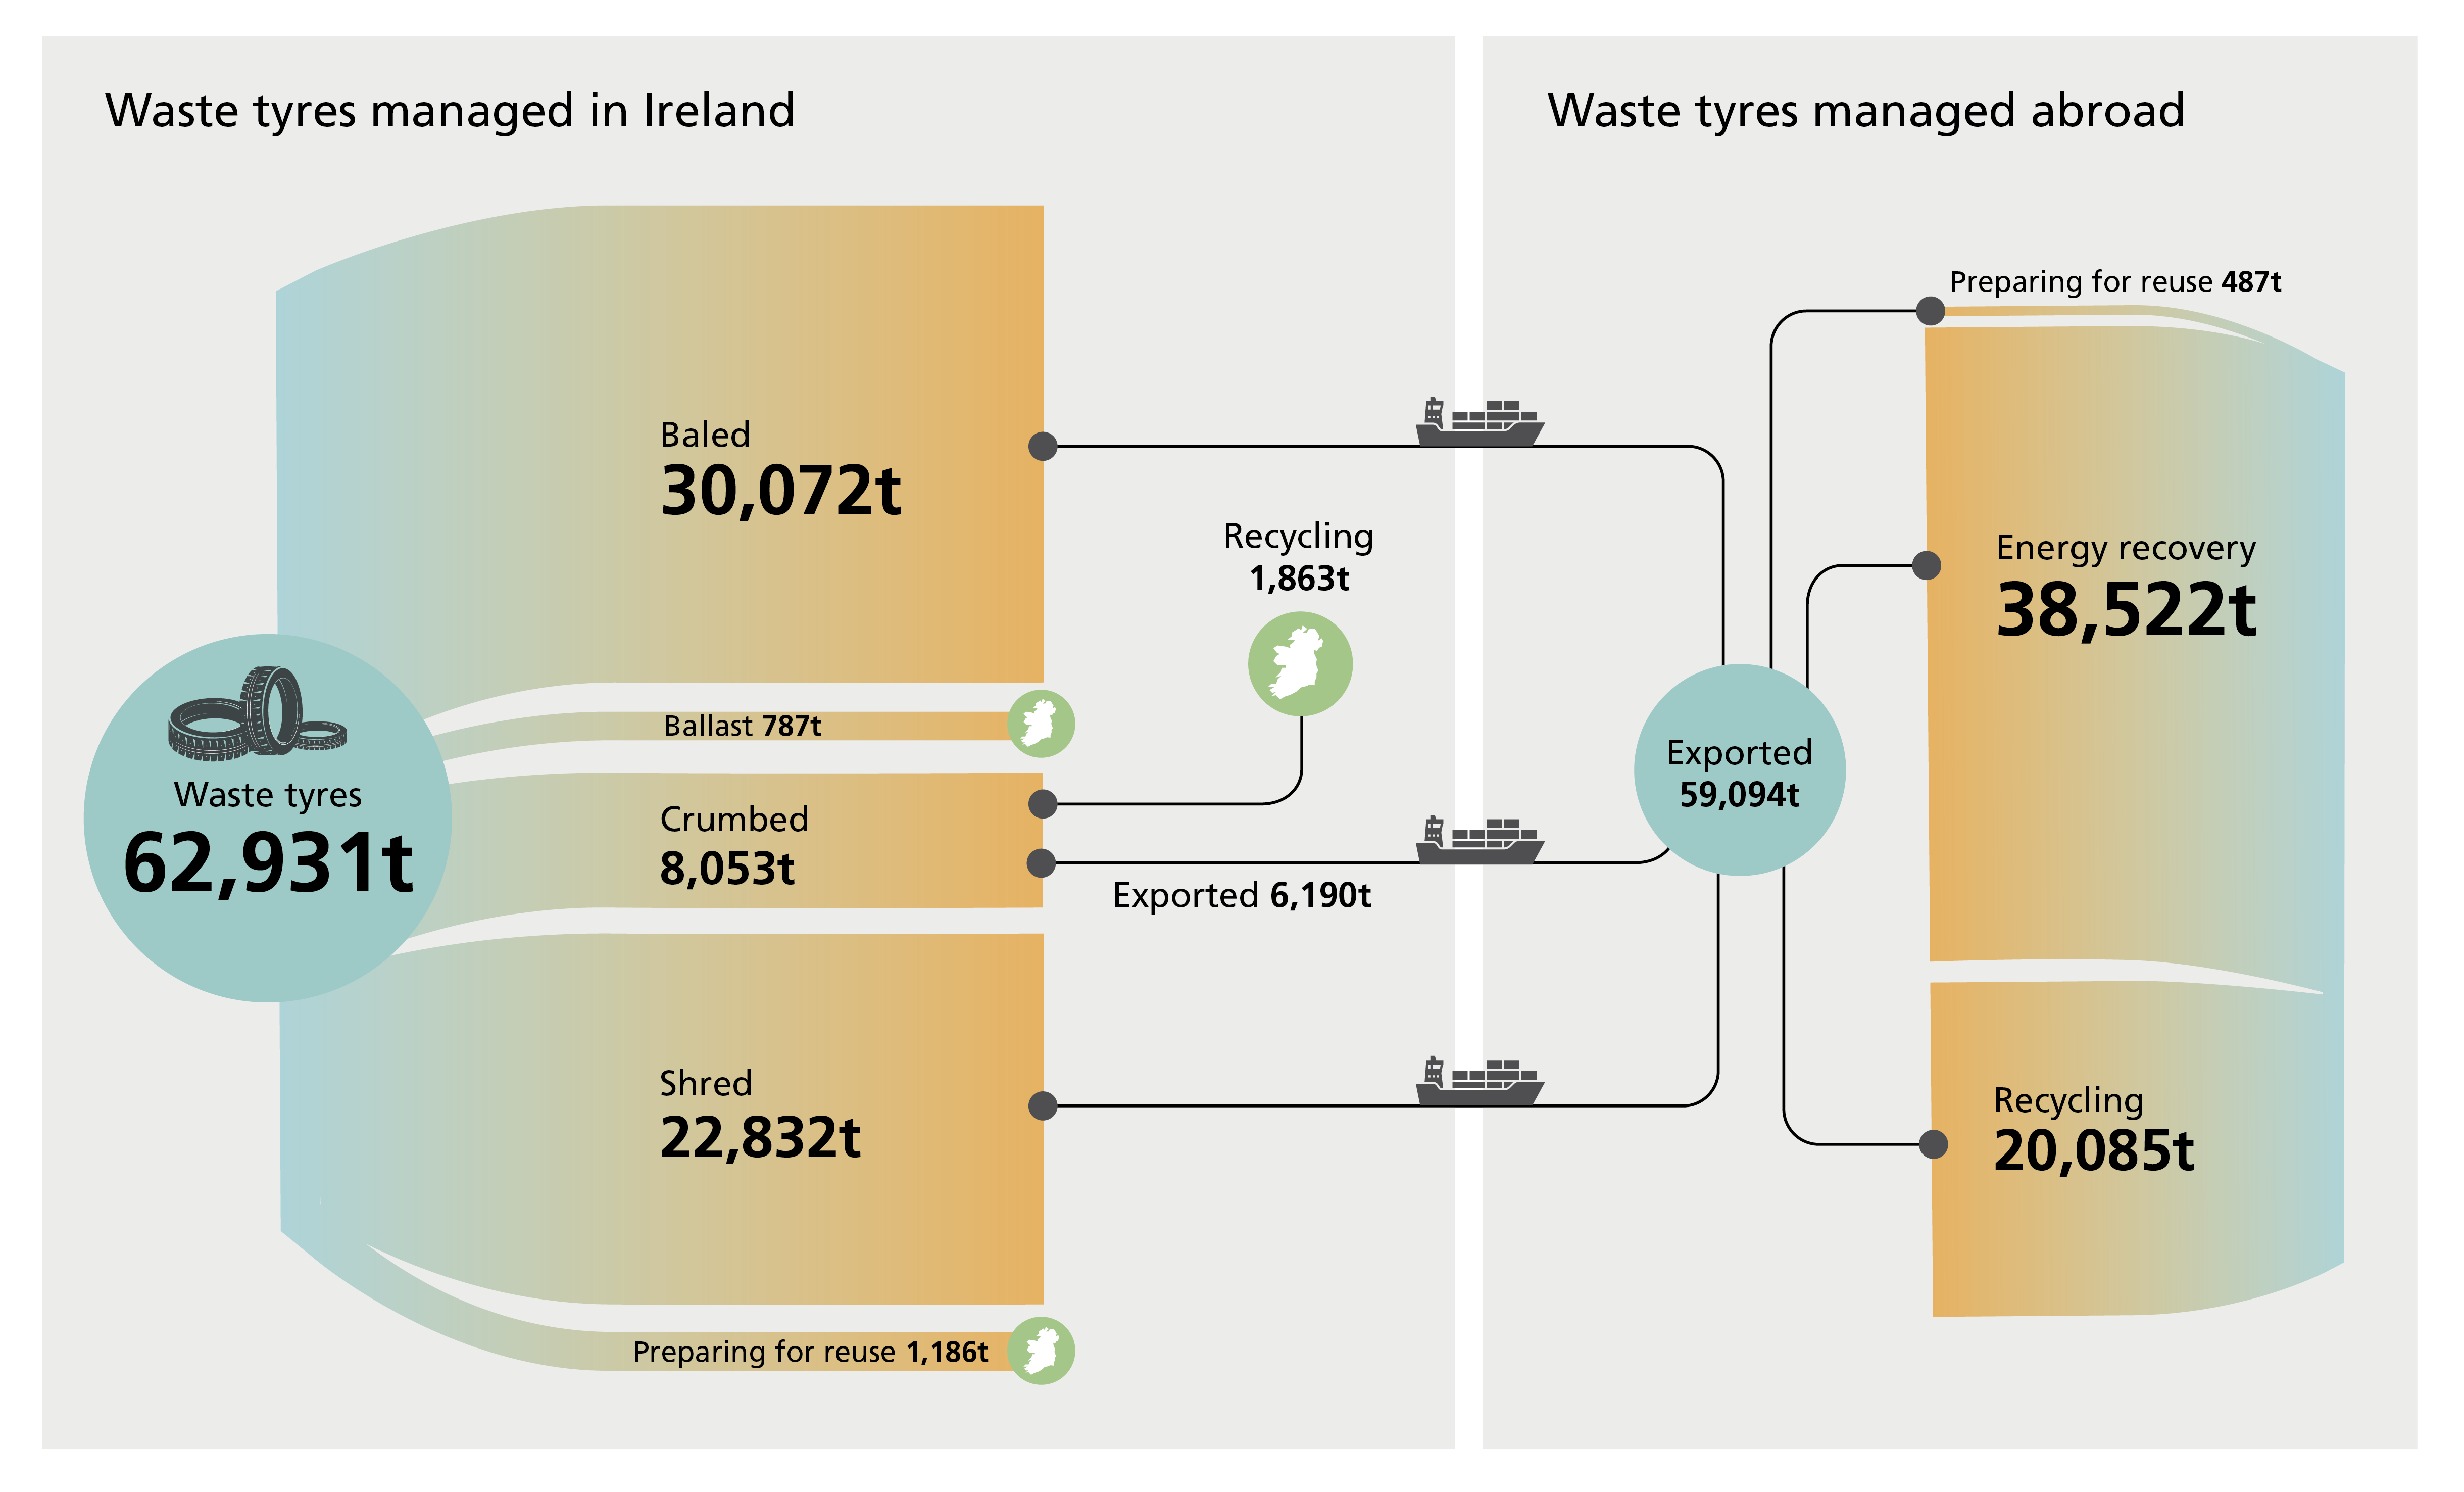 Waste Tyres managed in Ireland and abroad